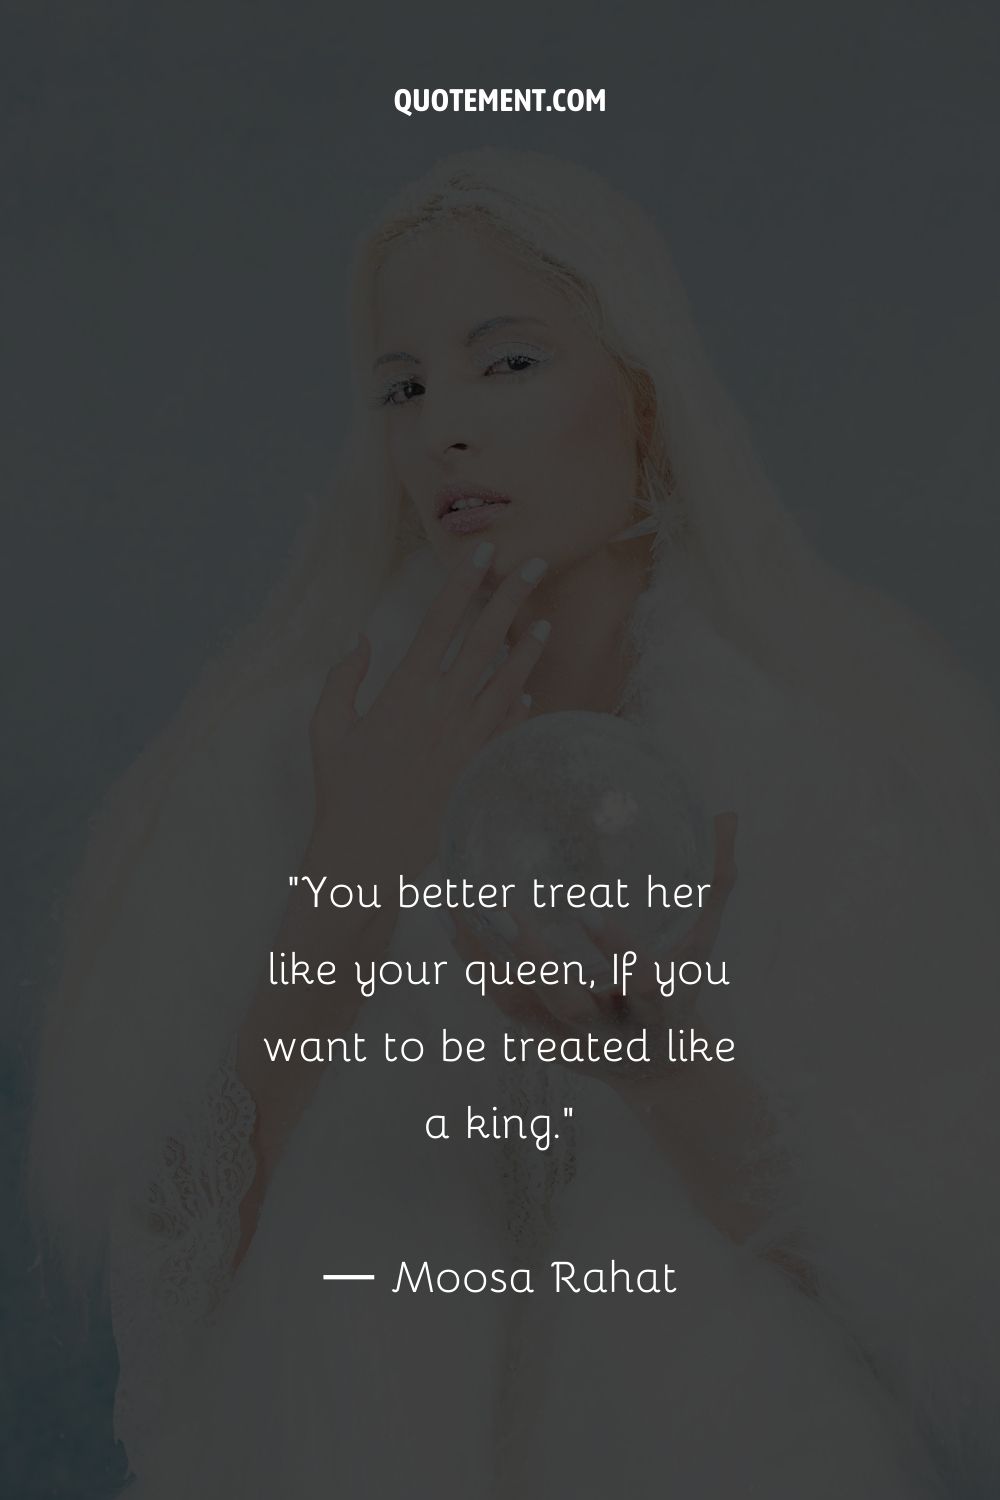 You better treat her like your queen, If you want to be treated like a king